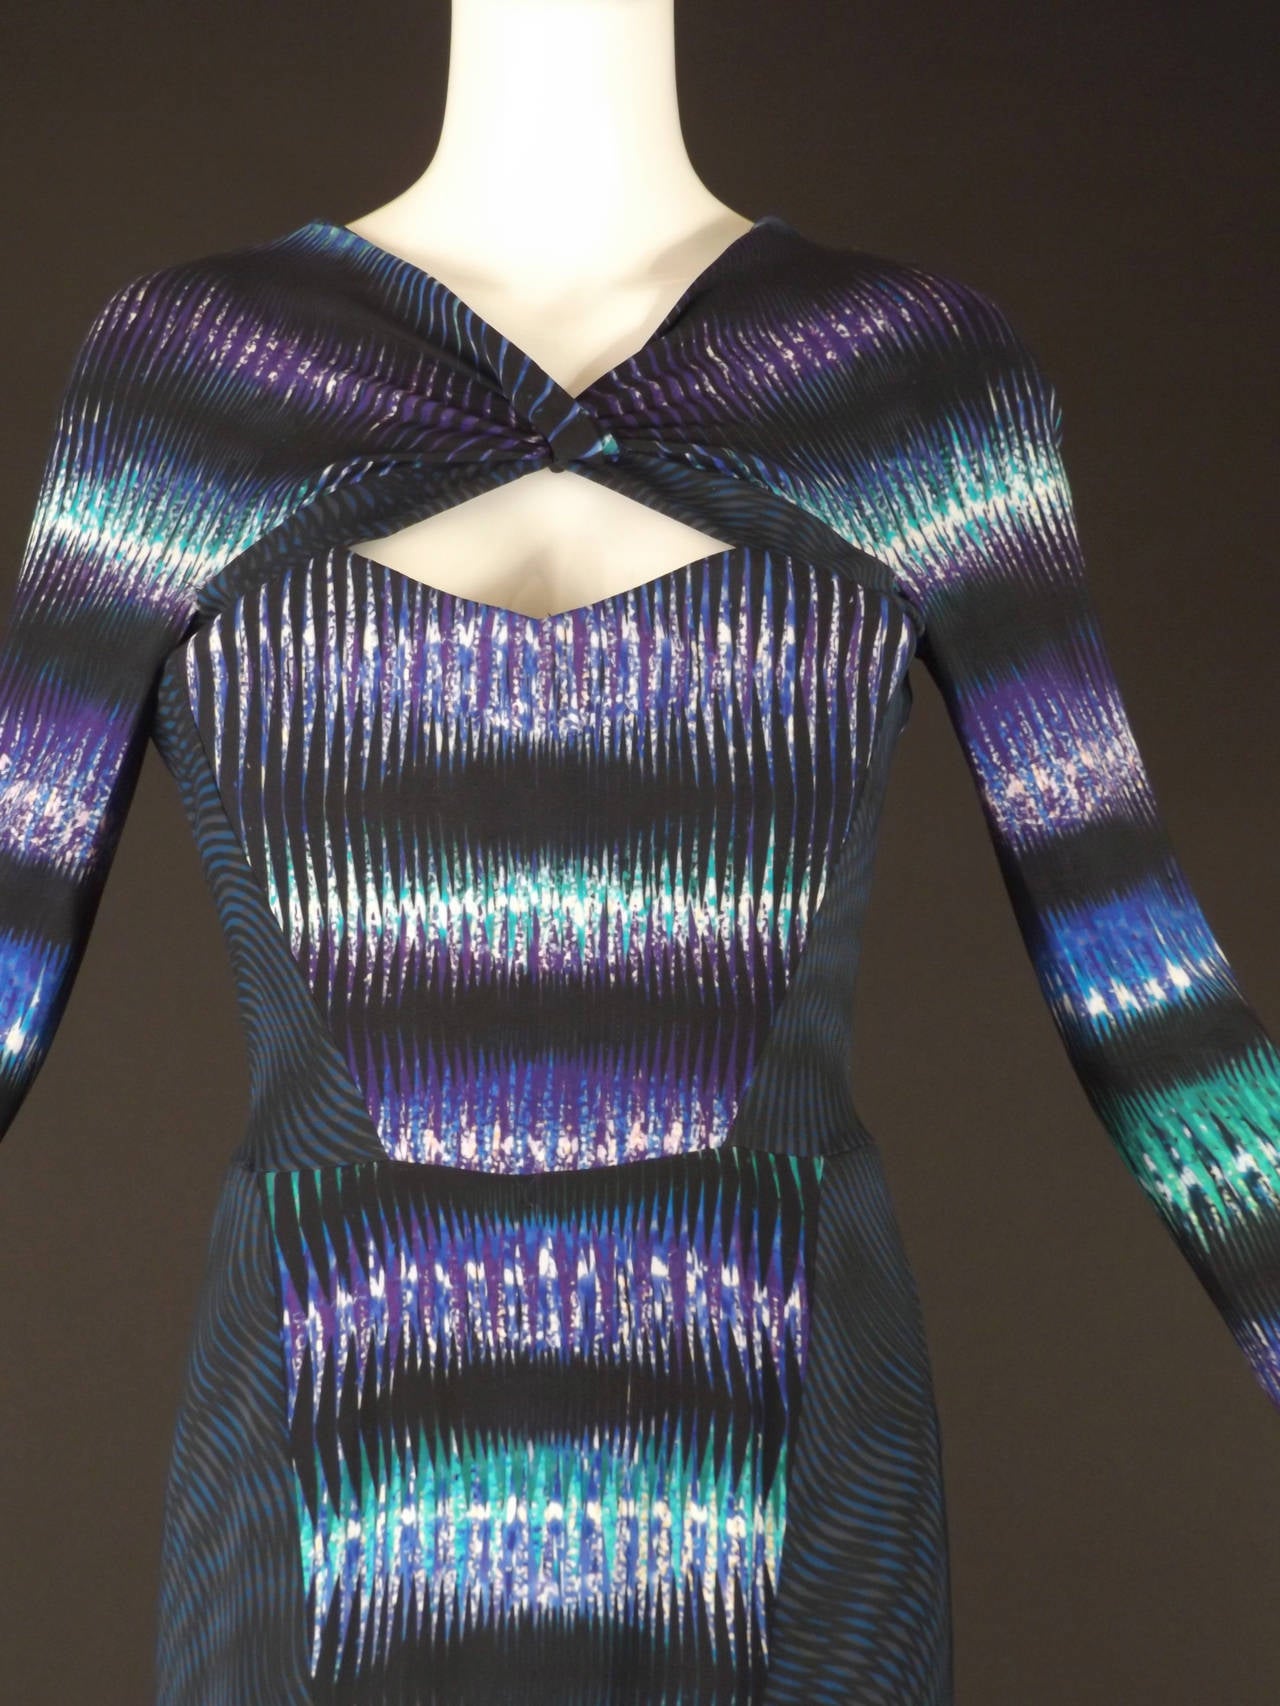 What and awesome piece! The rayon stretch knit gown has two fabrics puzzle pieced together to make one amazing design. One is a zig zag style in green, black, purple and blue. The other is a variegated wavy print in black, blue and gray. The gown